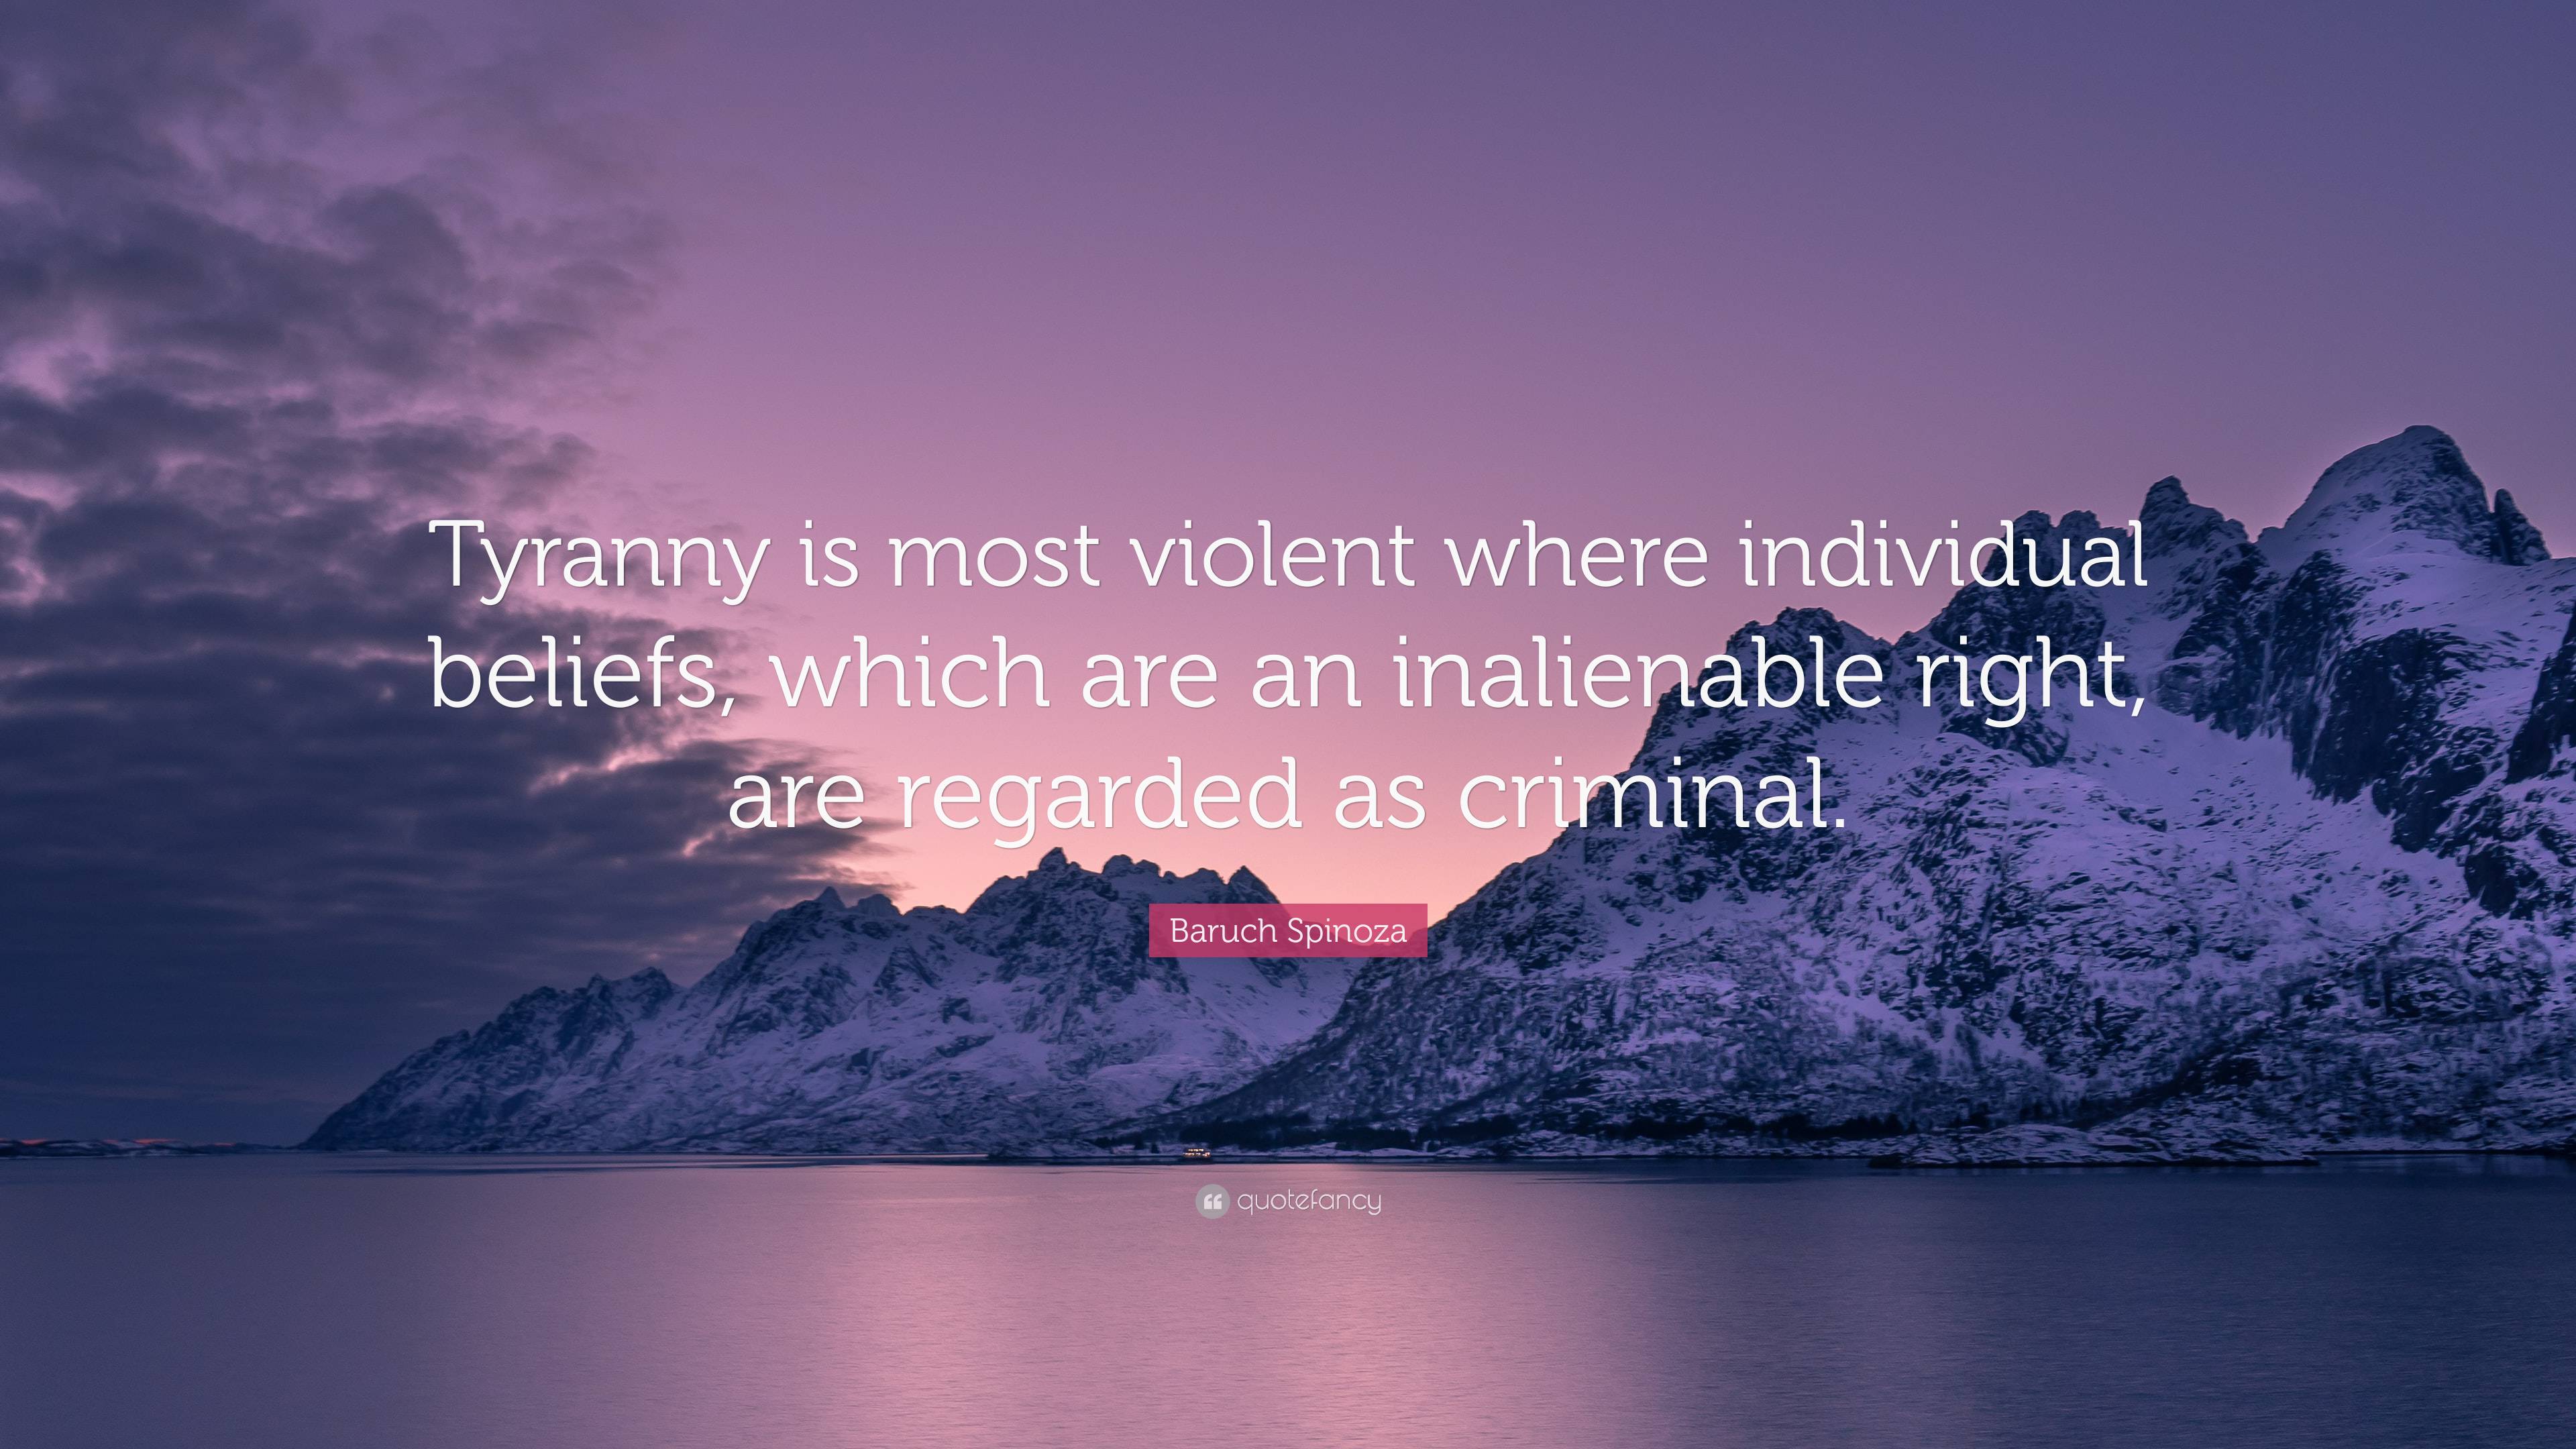 Baruch spinoza quote âtyranny is most violent where individual beliefs which are an inalienable right are